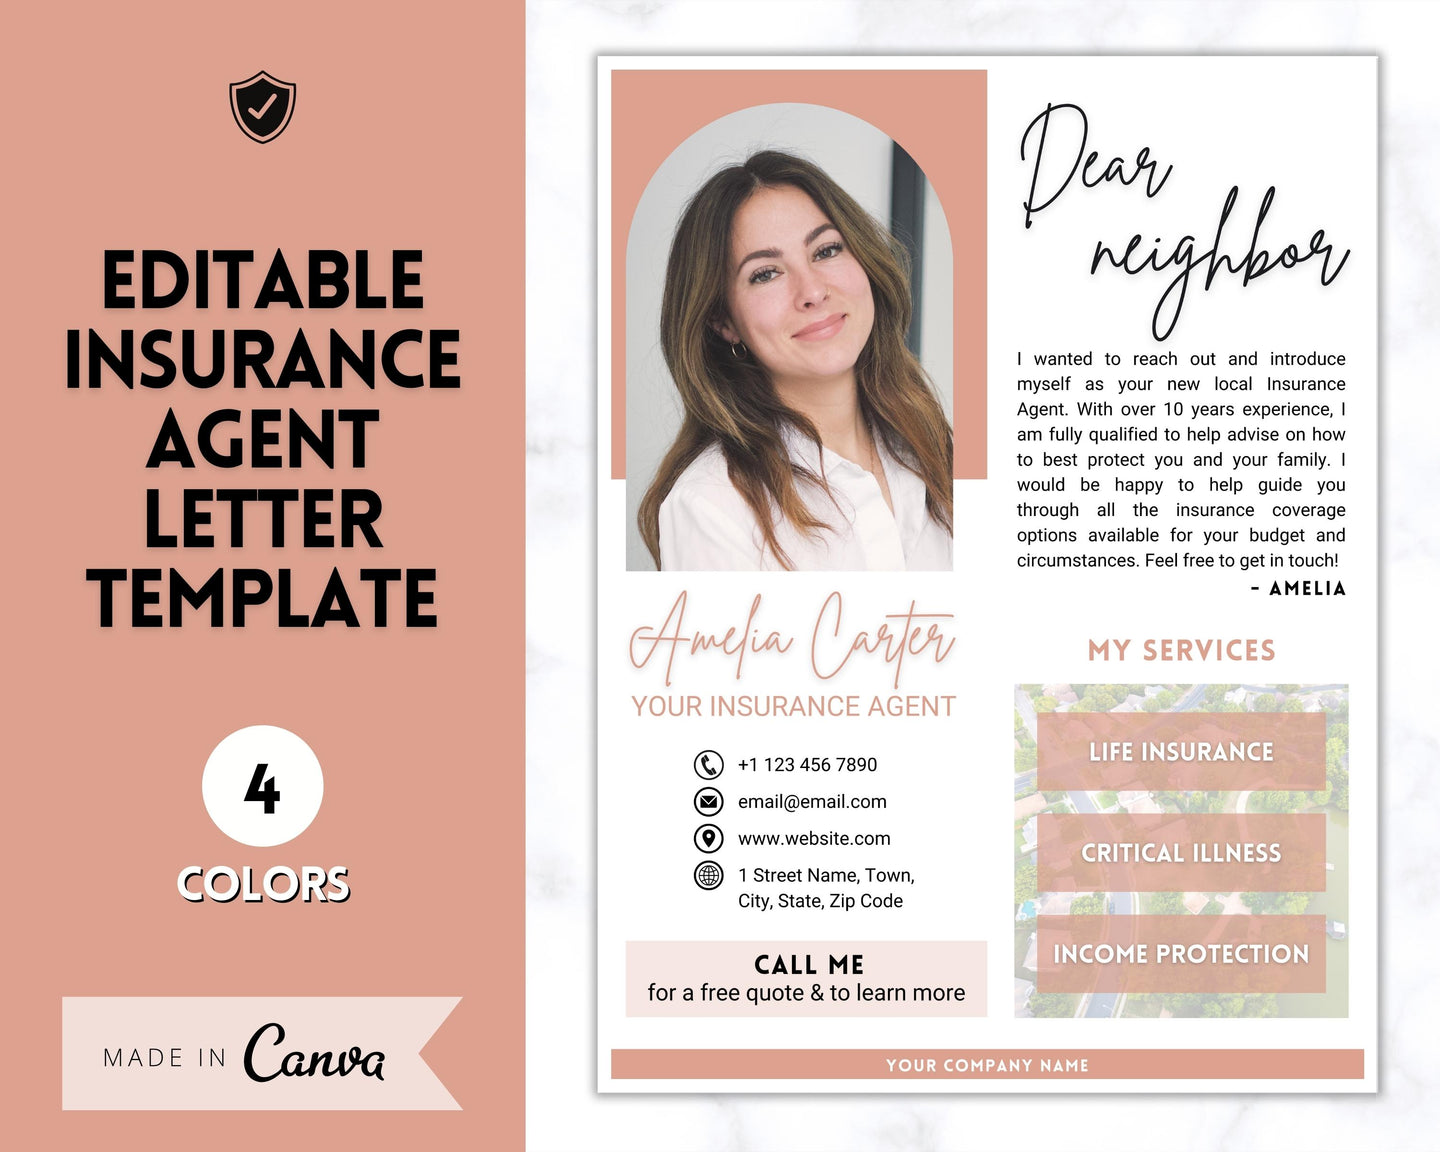 Insurance Broker Introduction Flyer Template | Life Insurance, Mortgage Agent, Financial Advisor, Editable Canva Template | Brown